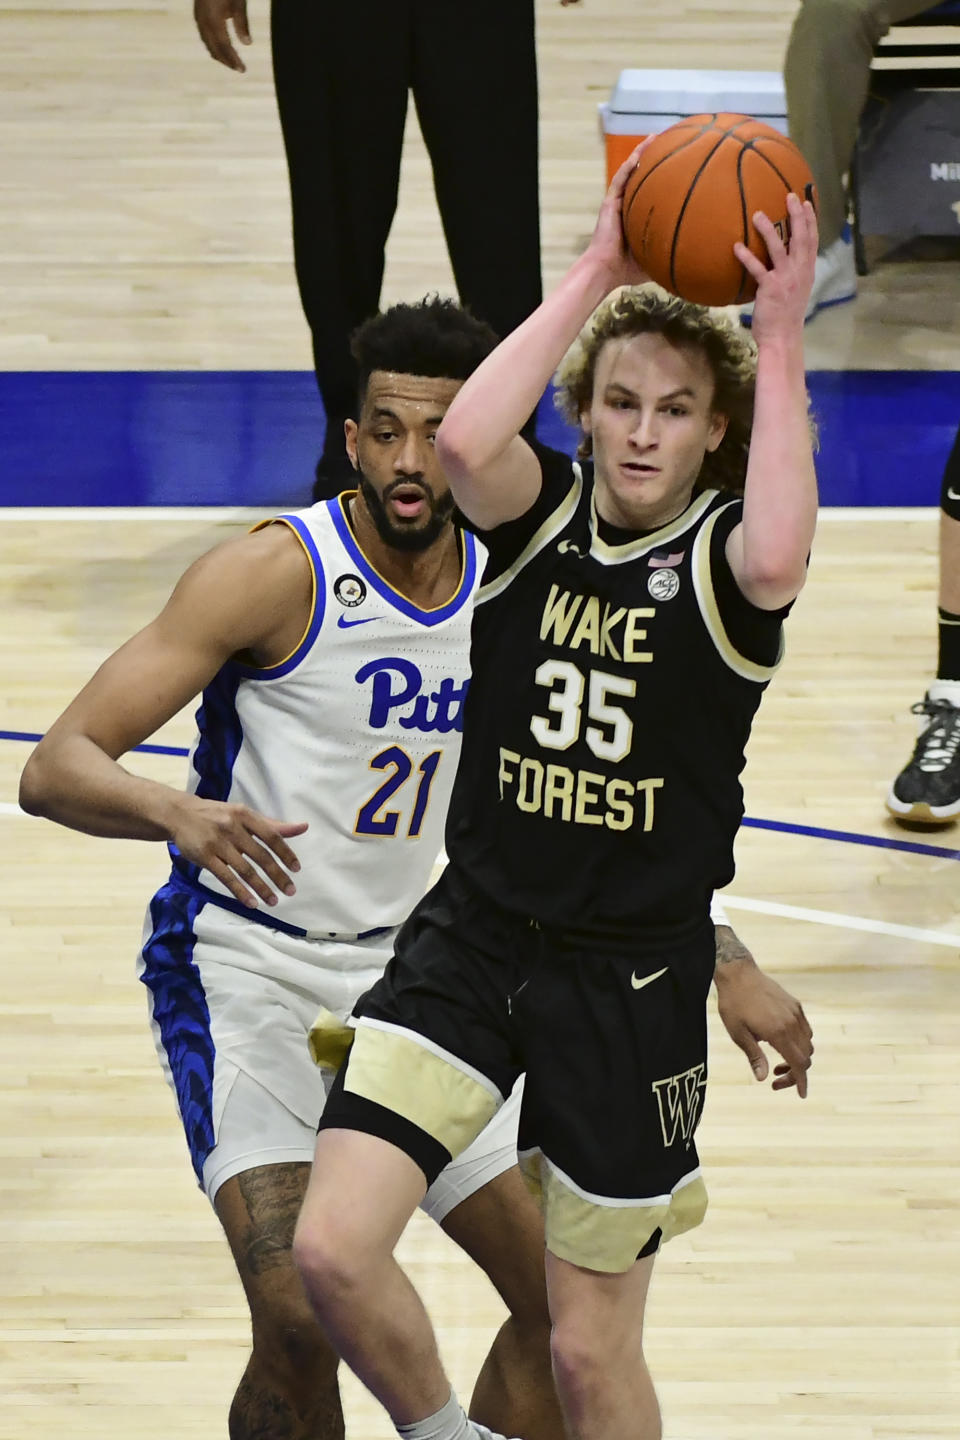 Wake Forest forward Carter Whitt drives past Pittsburgh forward Terrell Brown during the first half of an NCAA college basketball game, Tuesday, March 2, 2021, in Pittsburgh. (AP Photo/Fred Vuich)